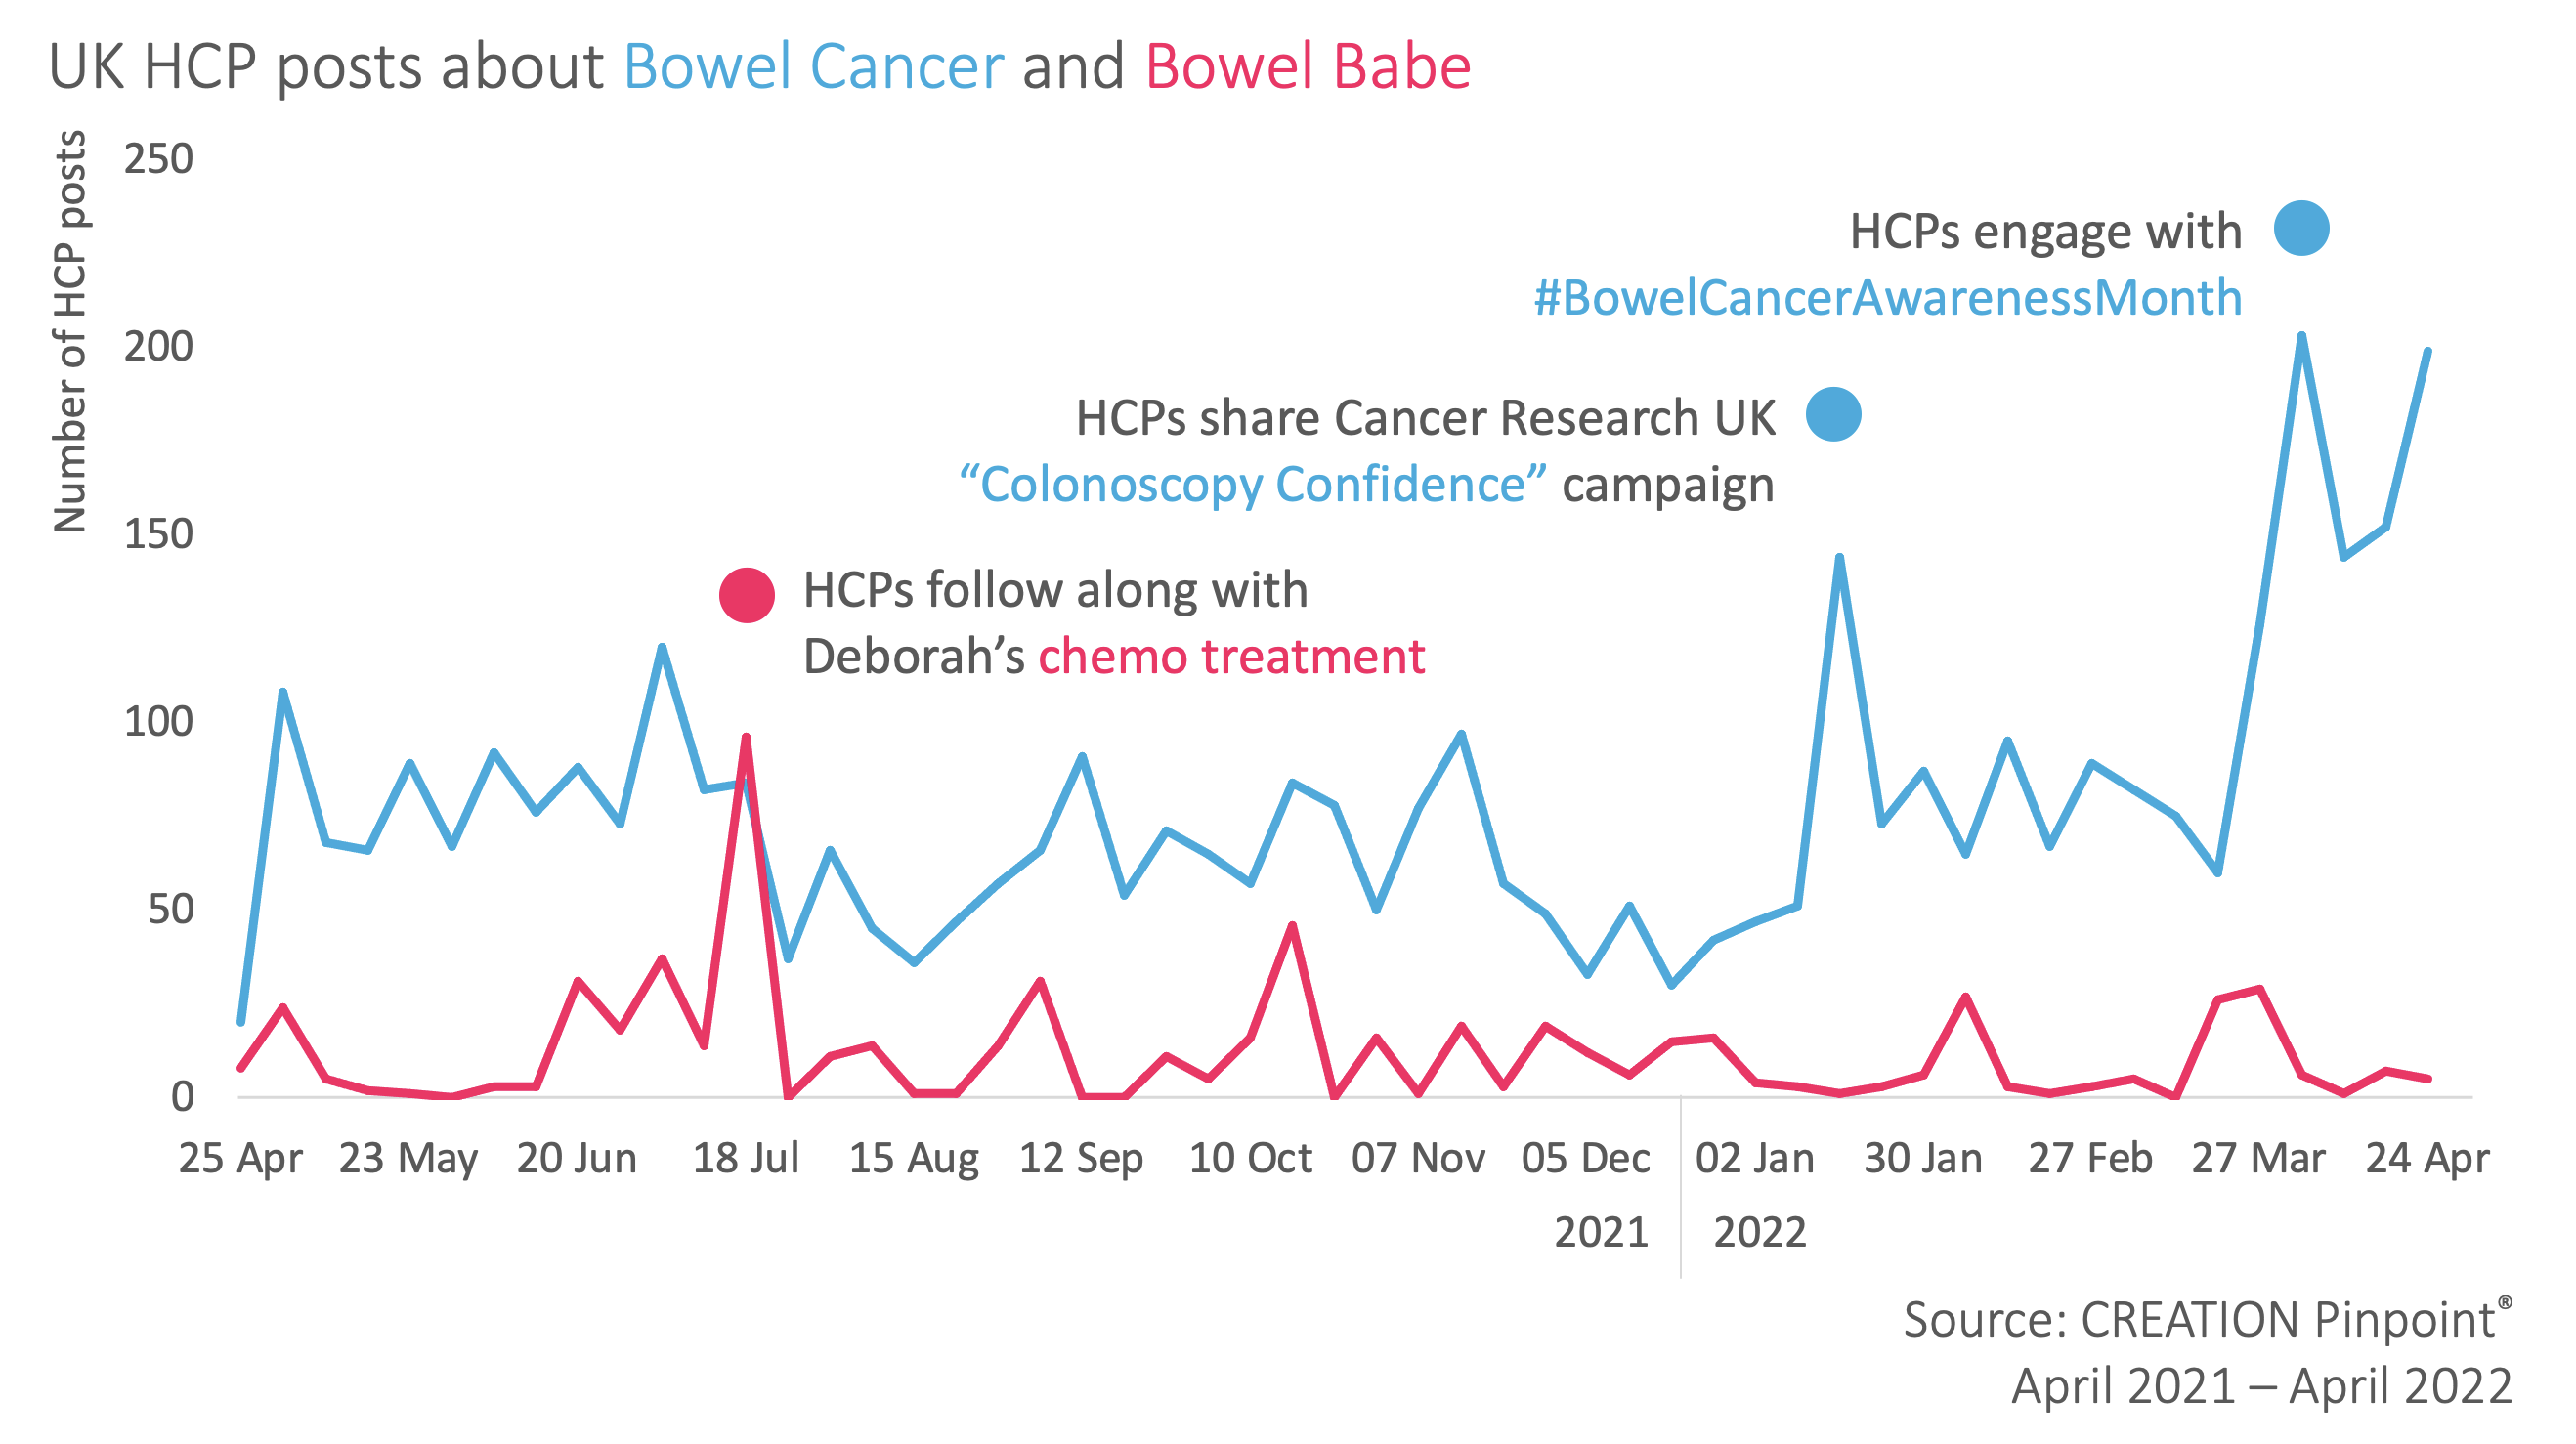 Graph showing UK HCP pots about bowel cancer and Bowel Babe